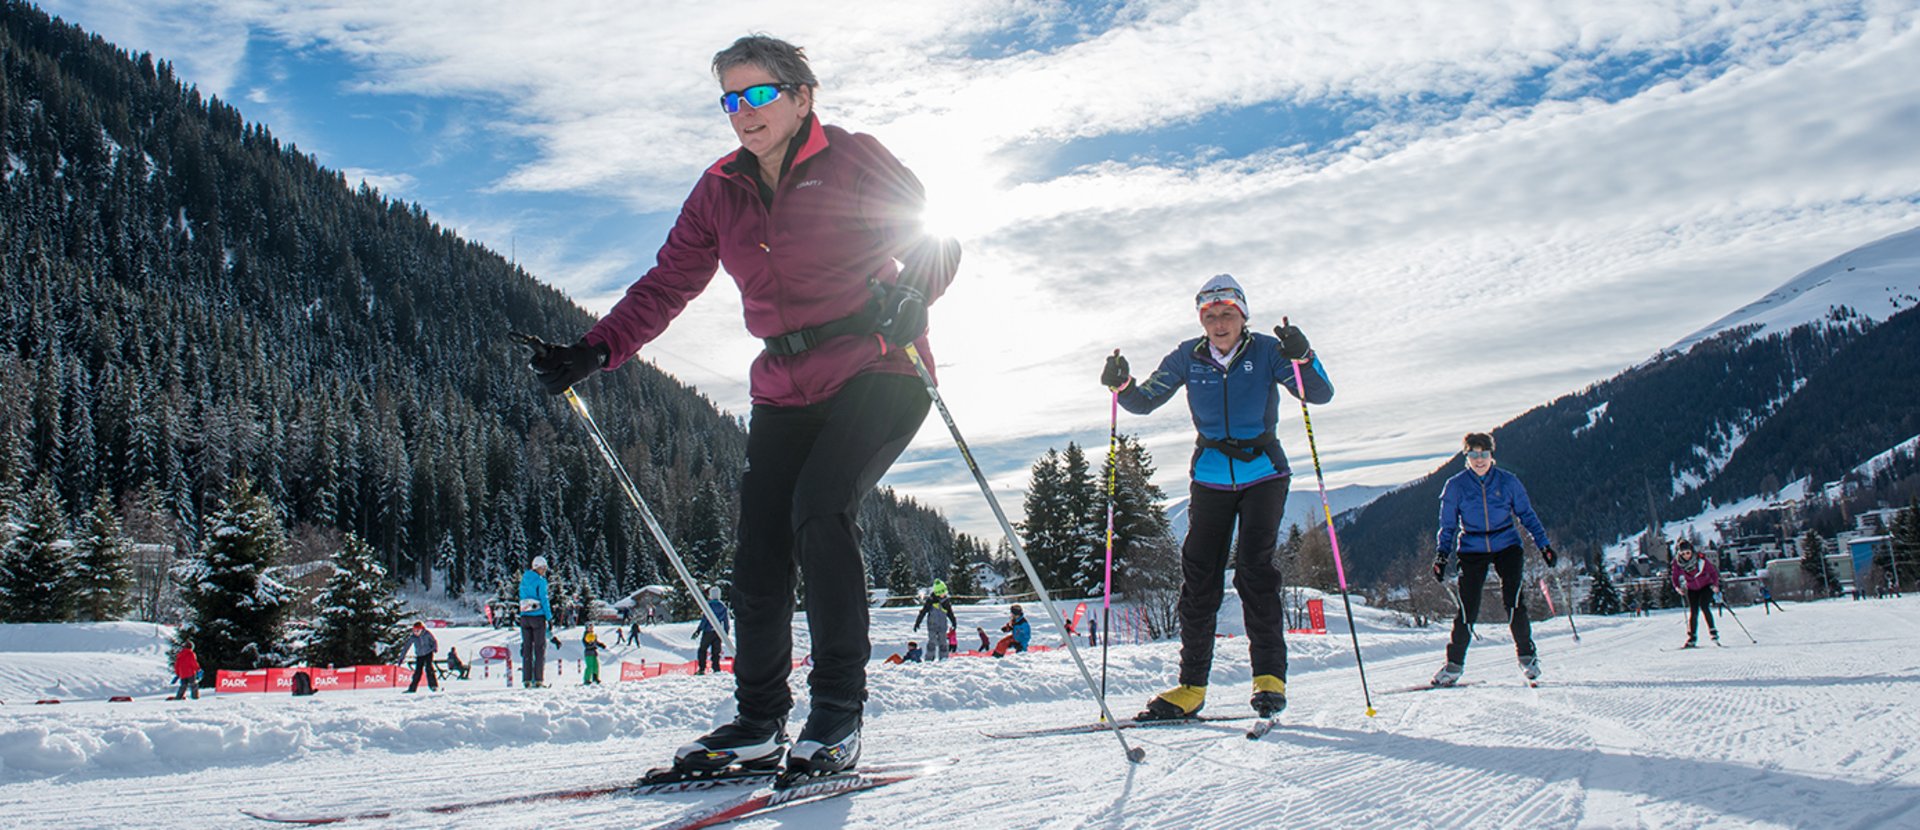 Cross-country skiing events